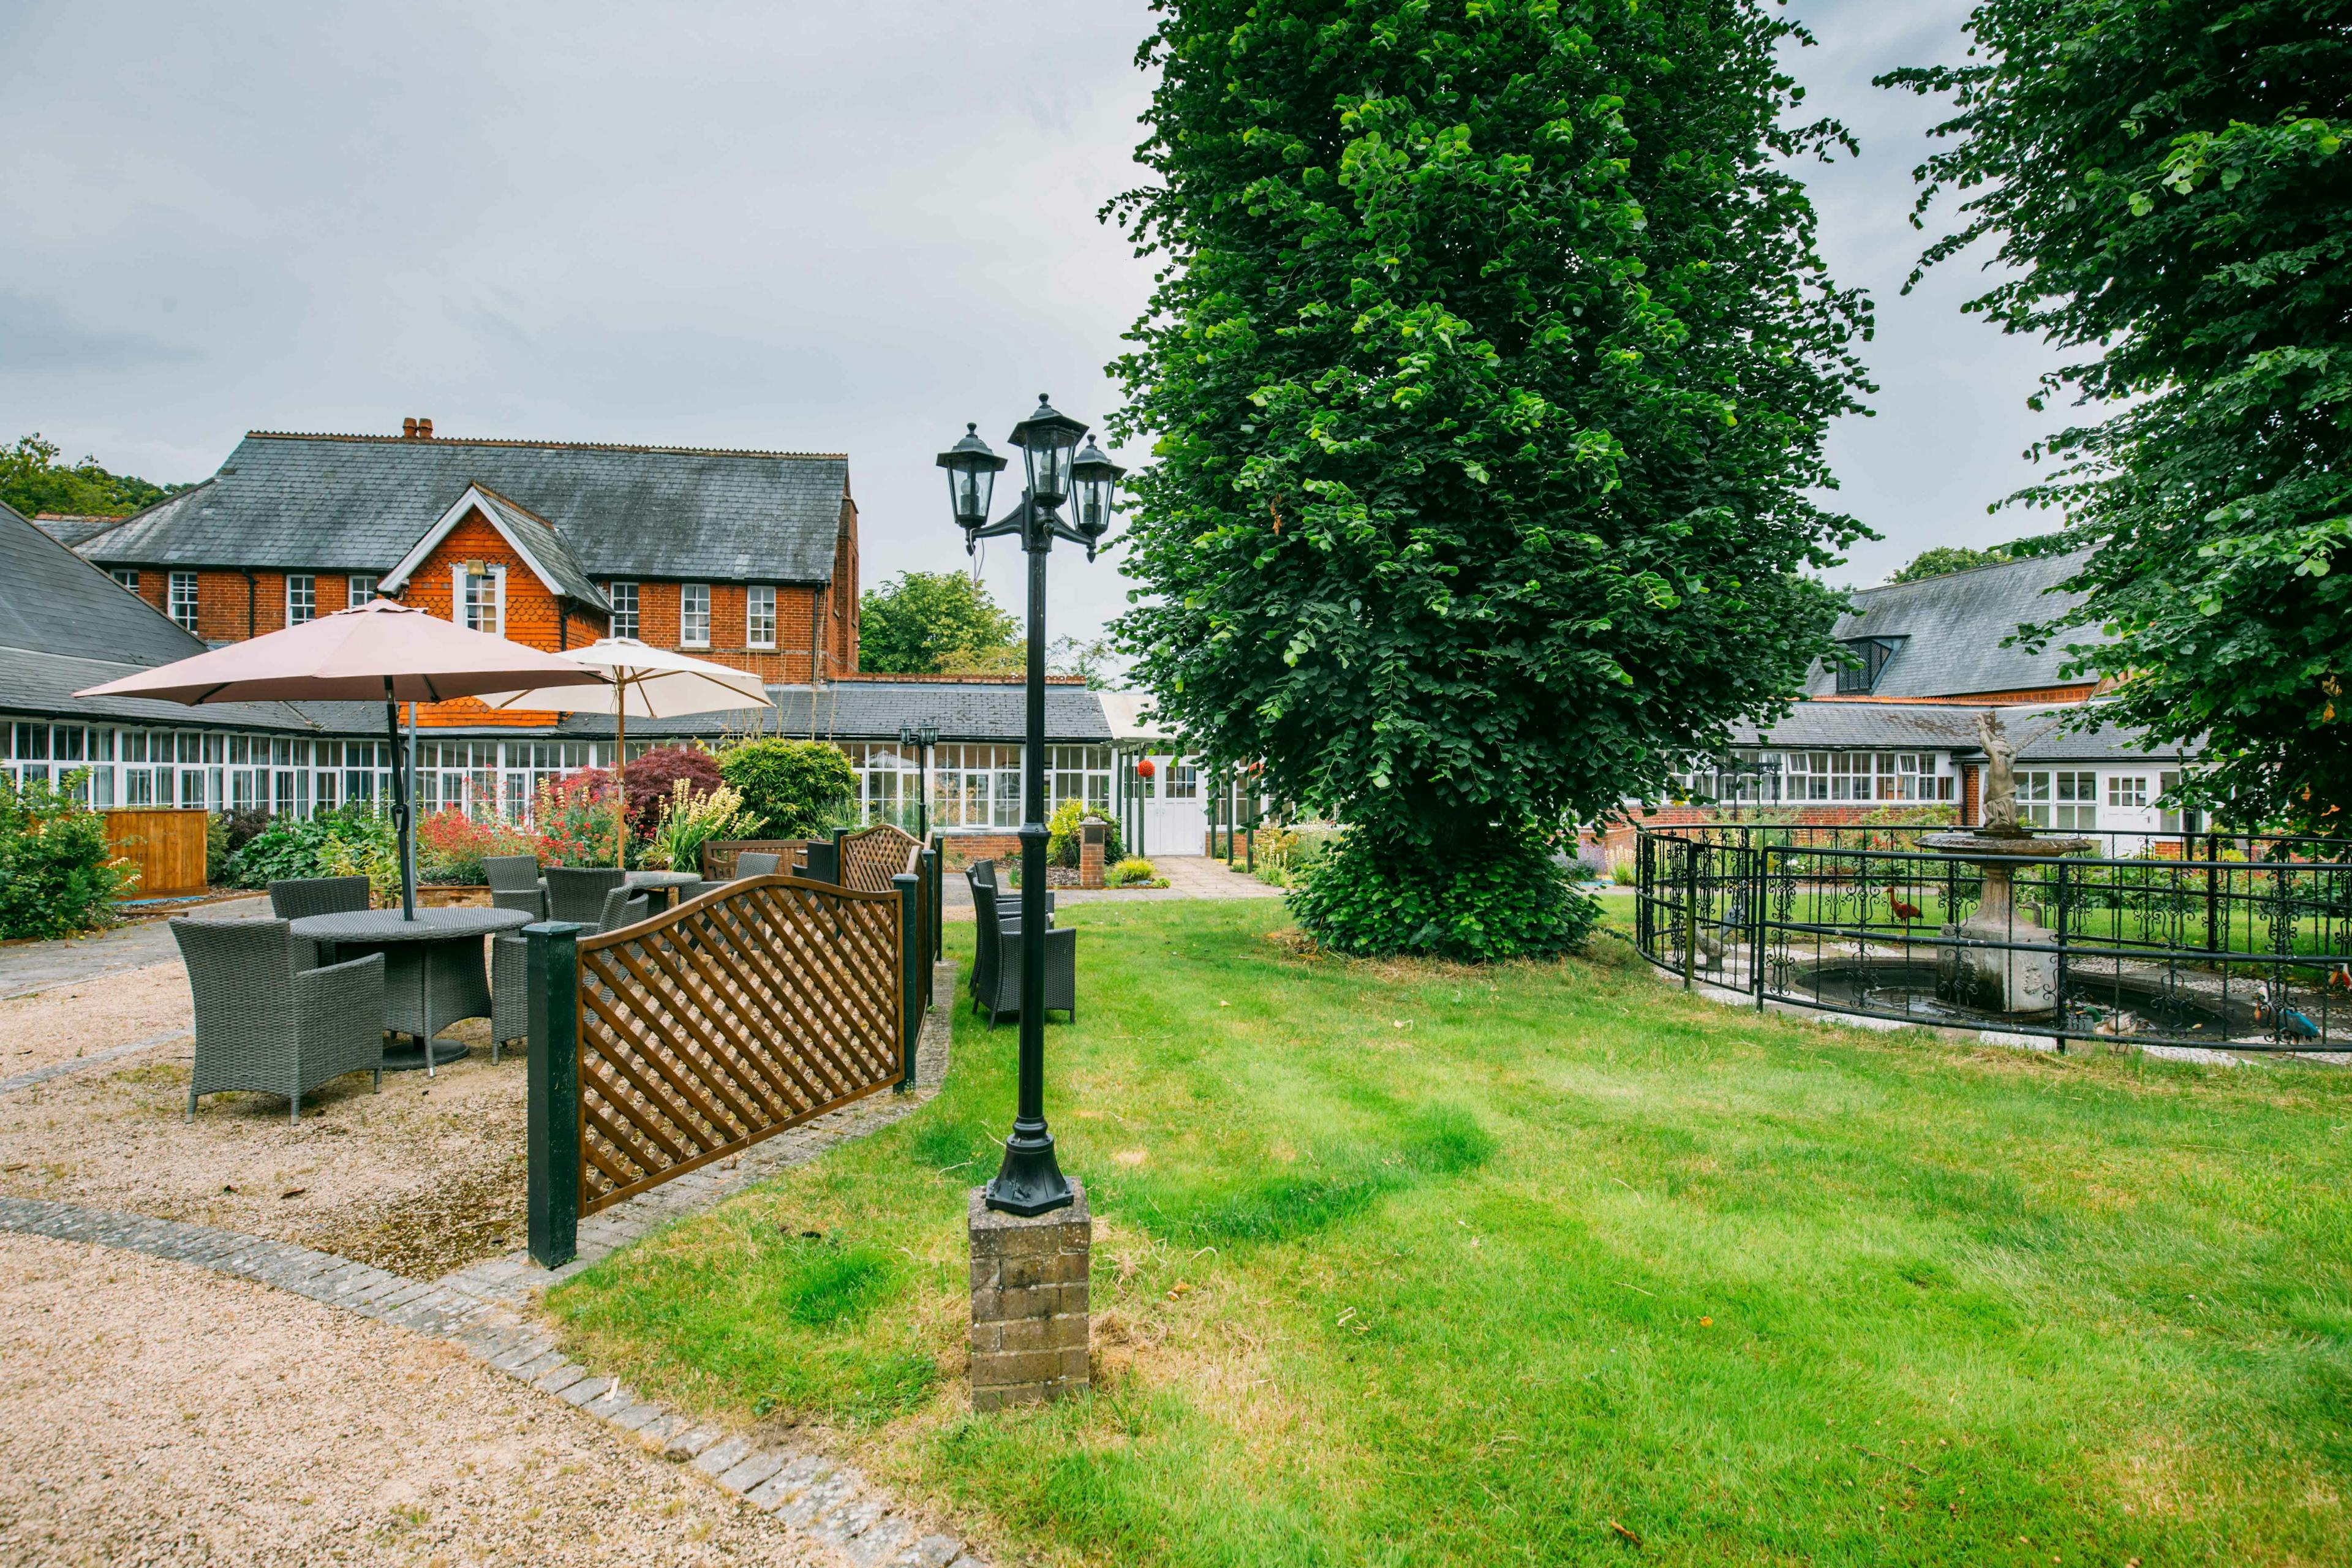 Garden at St Thomas Care Home in Basingstoke, Hampshire